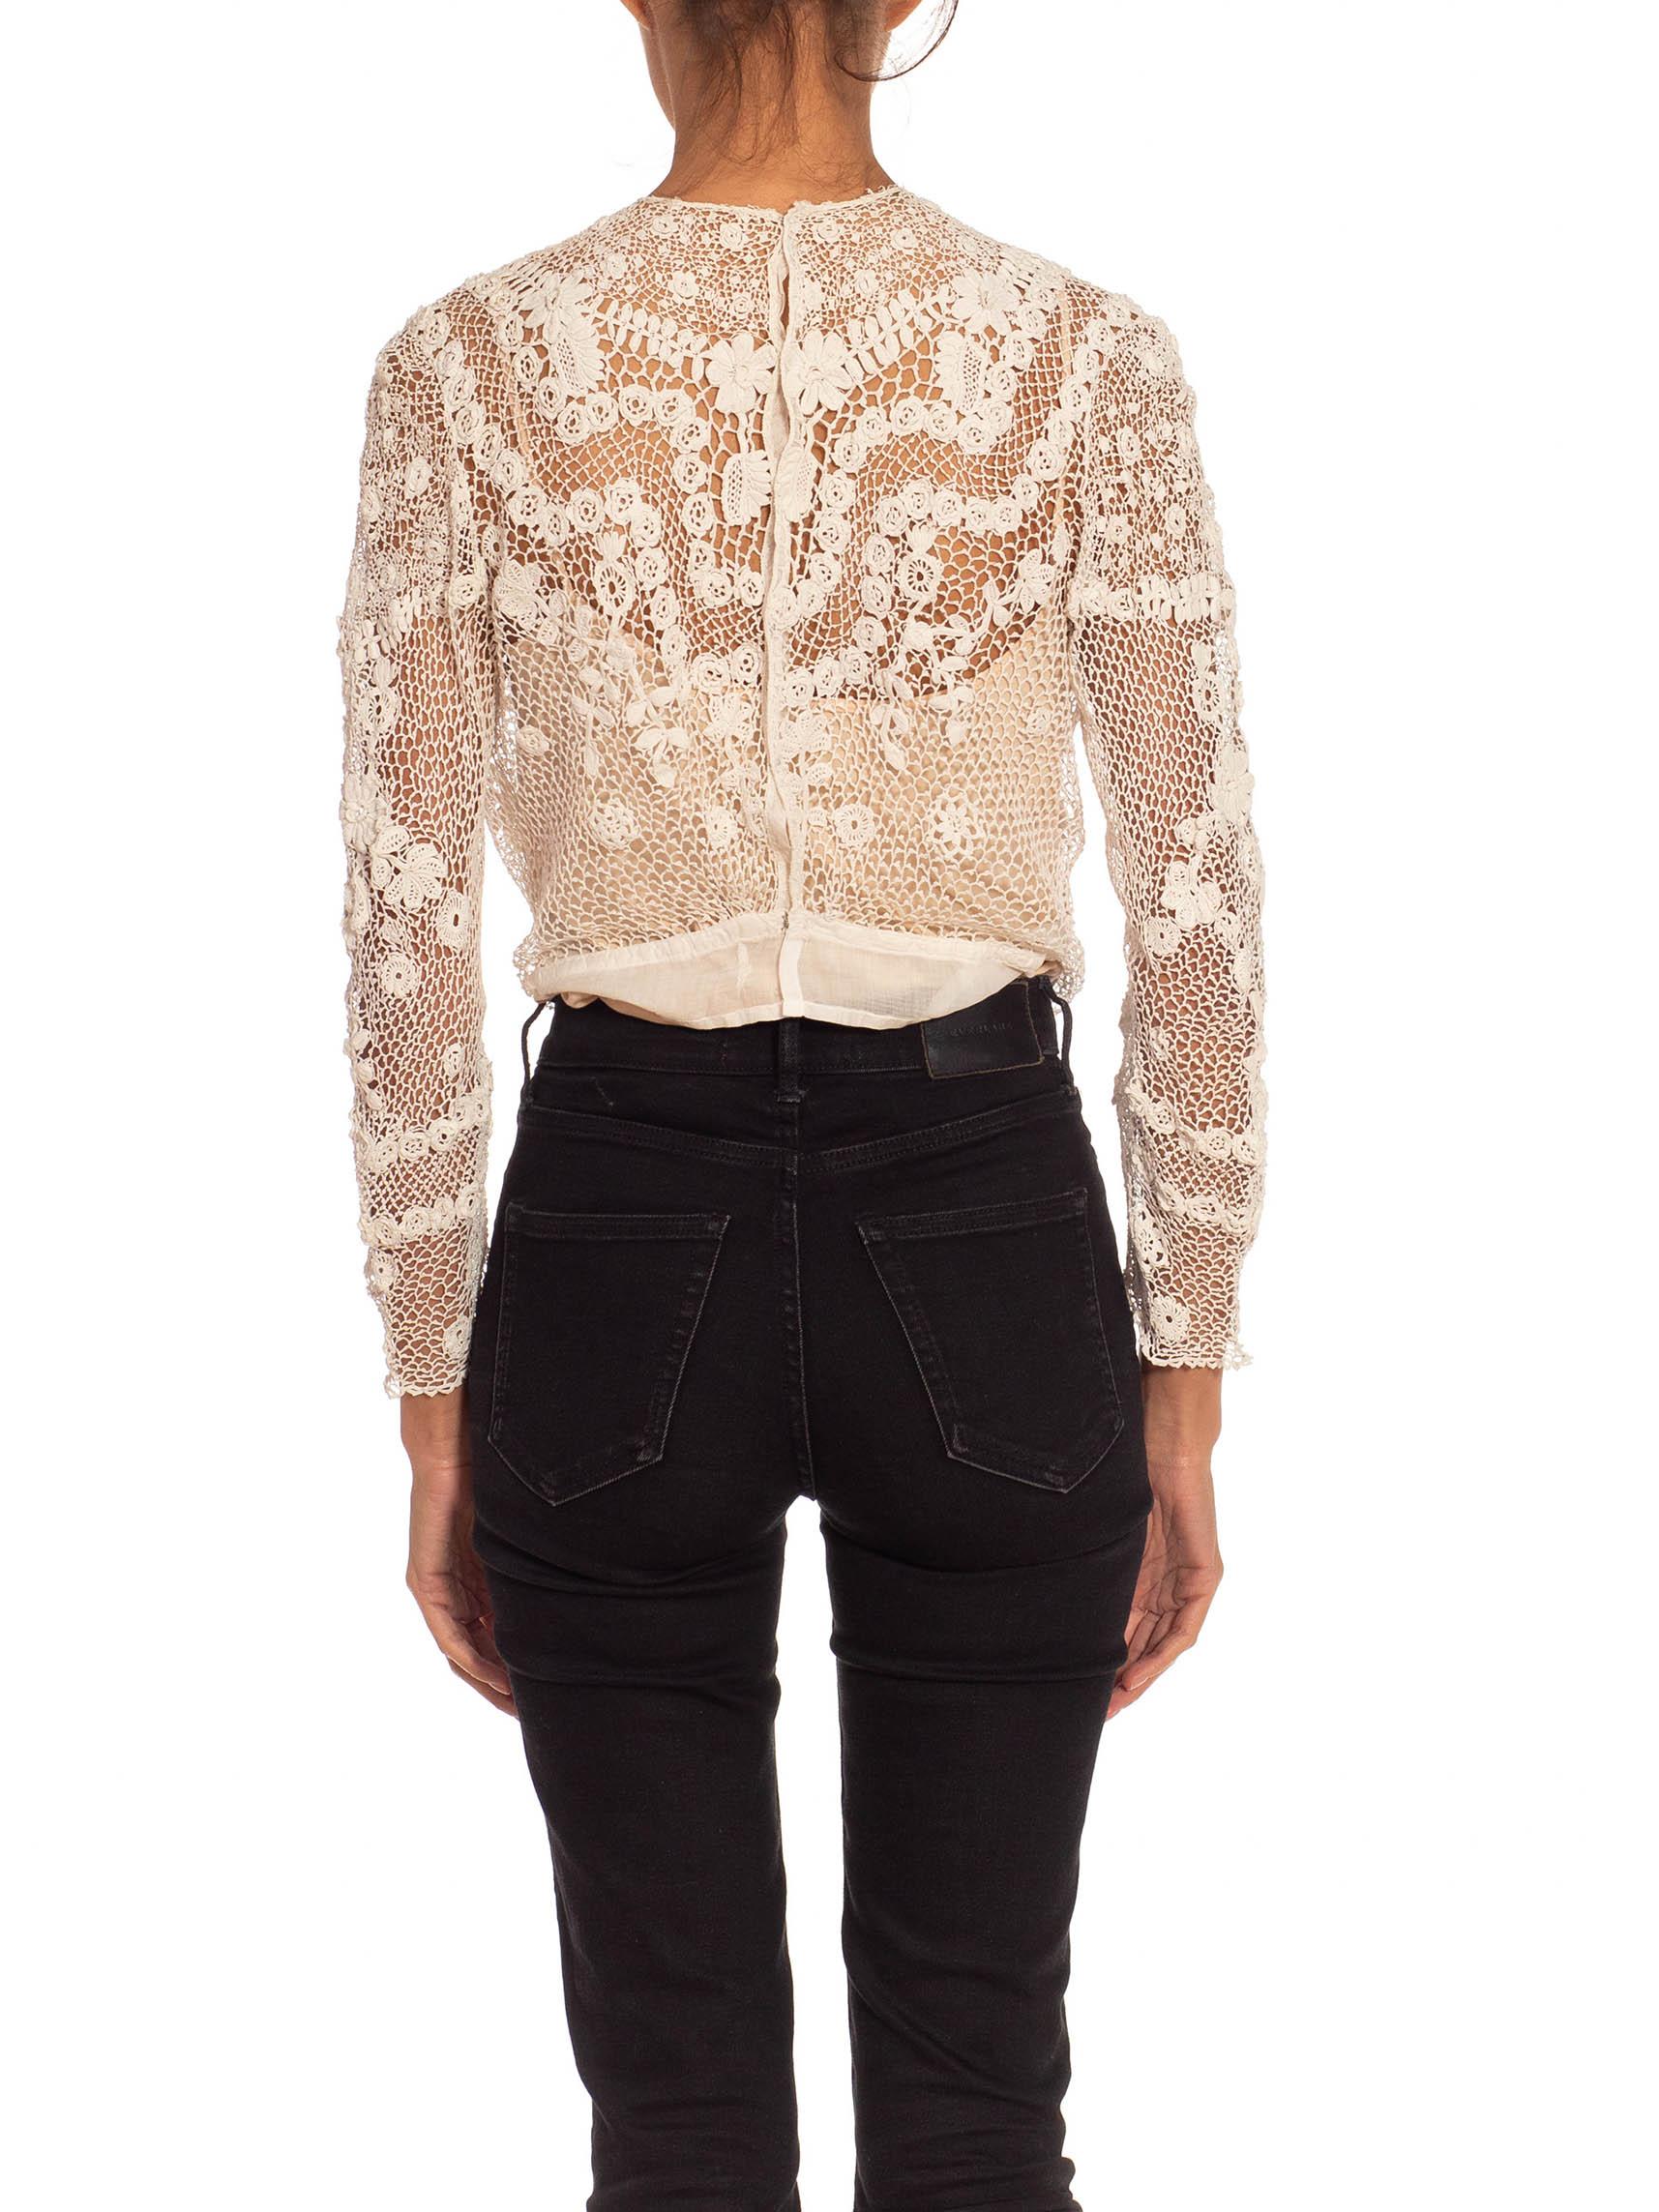 Victorian White Floral Top With Long Sleeves For Sale 2